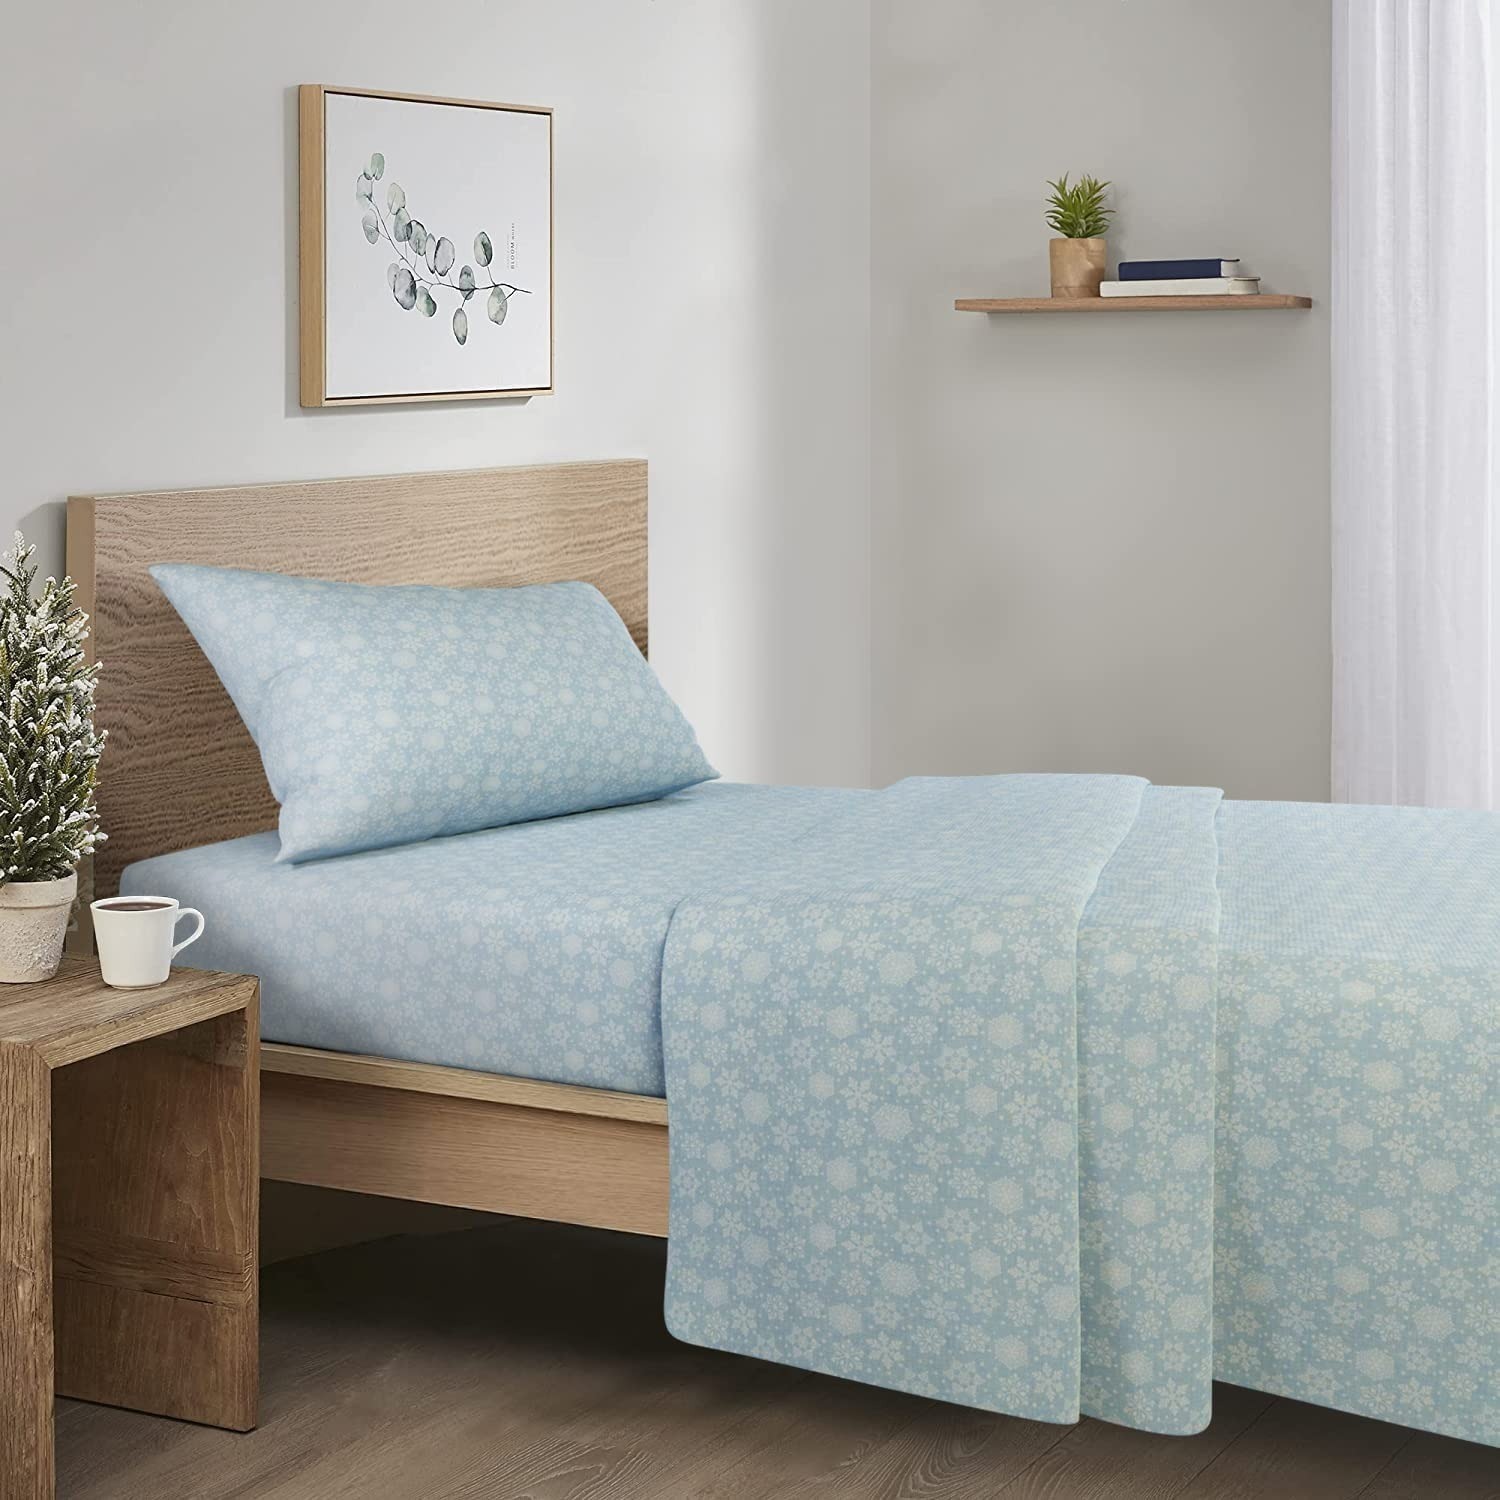 Comfort Spaces Flannel Bed Sheet Sets: 3 Piece Snowflake (Twin) $19.31, 4 Piece Grey (Queen) $25 & more + Free Shipping w/ Prime or $25+ orders